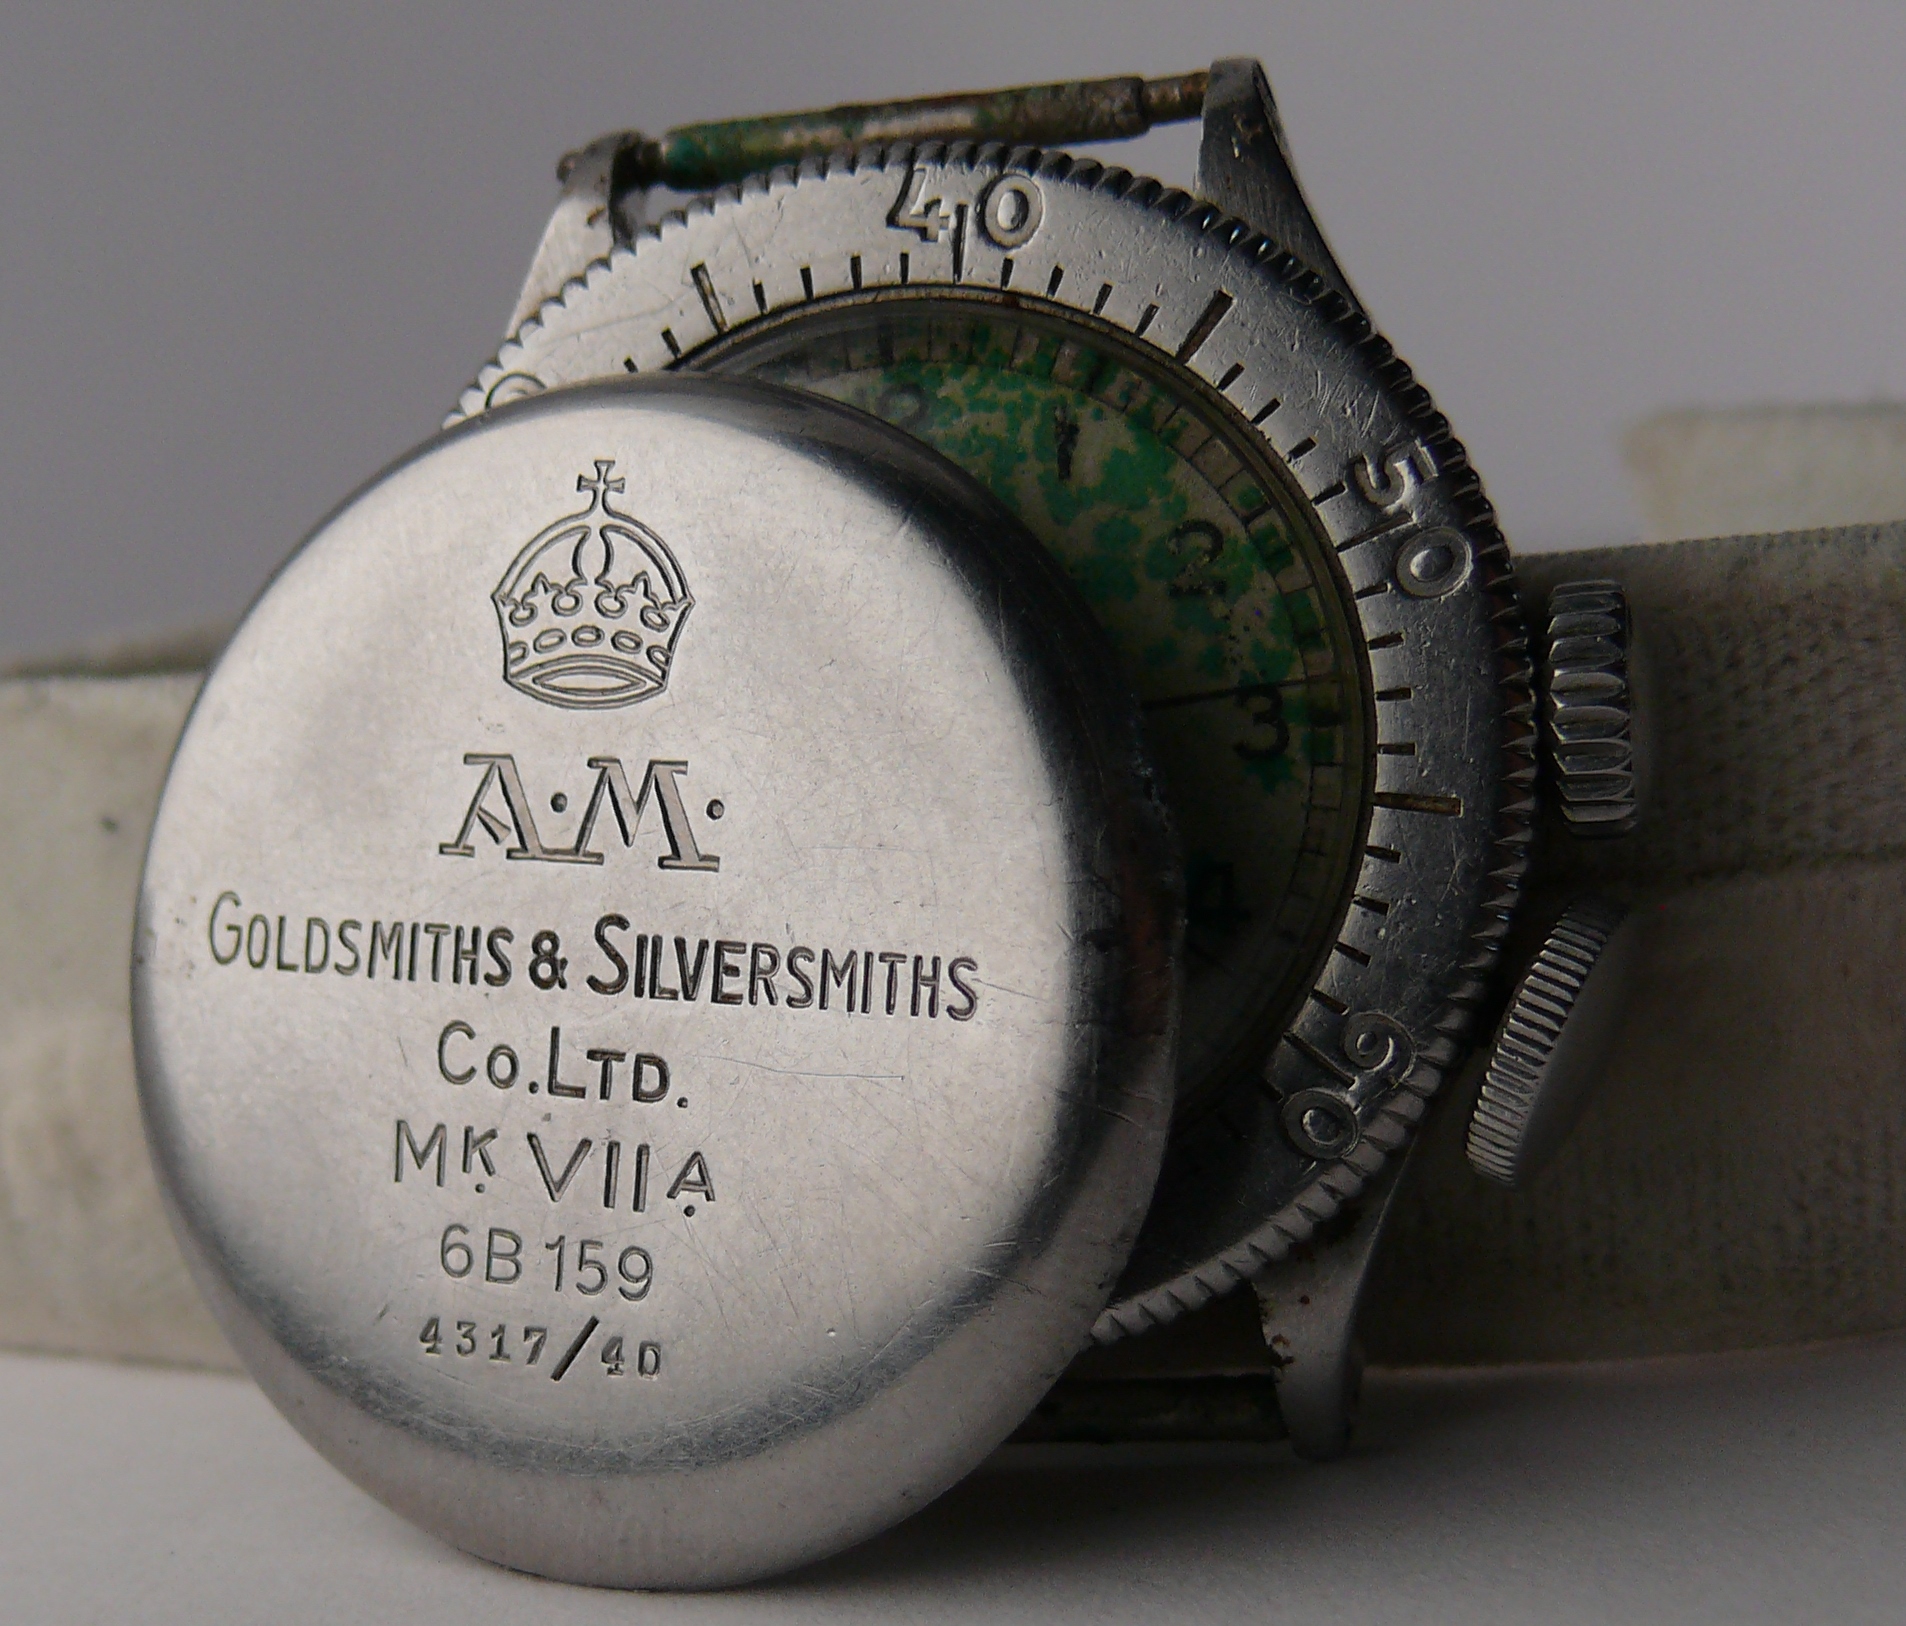 1940 WW2 Vintage Gents Omega RAF Weems Wristwatch Ref 6B 159. A very rare and collectable model, - Image 8 of 15